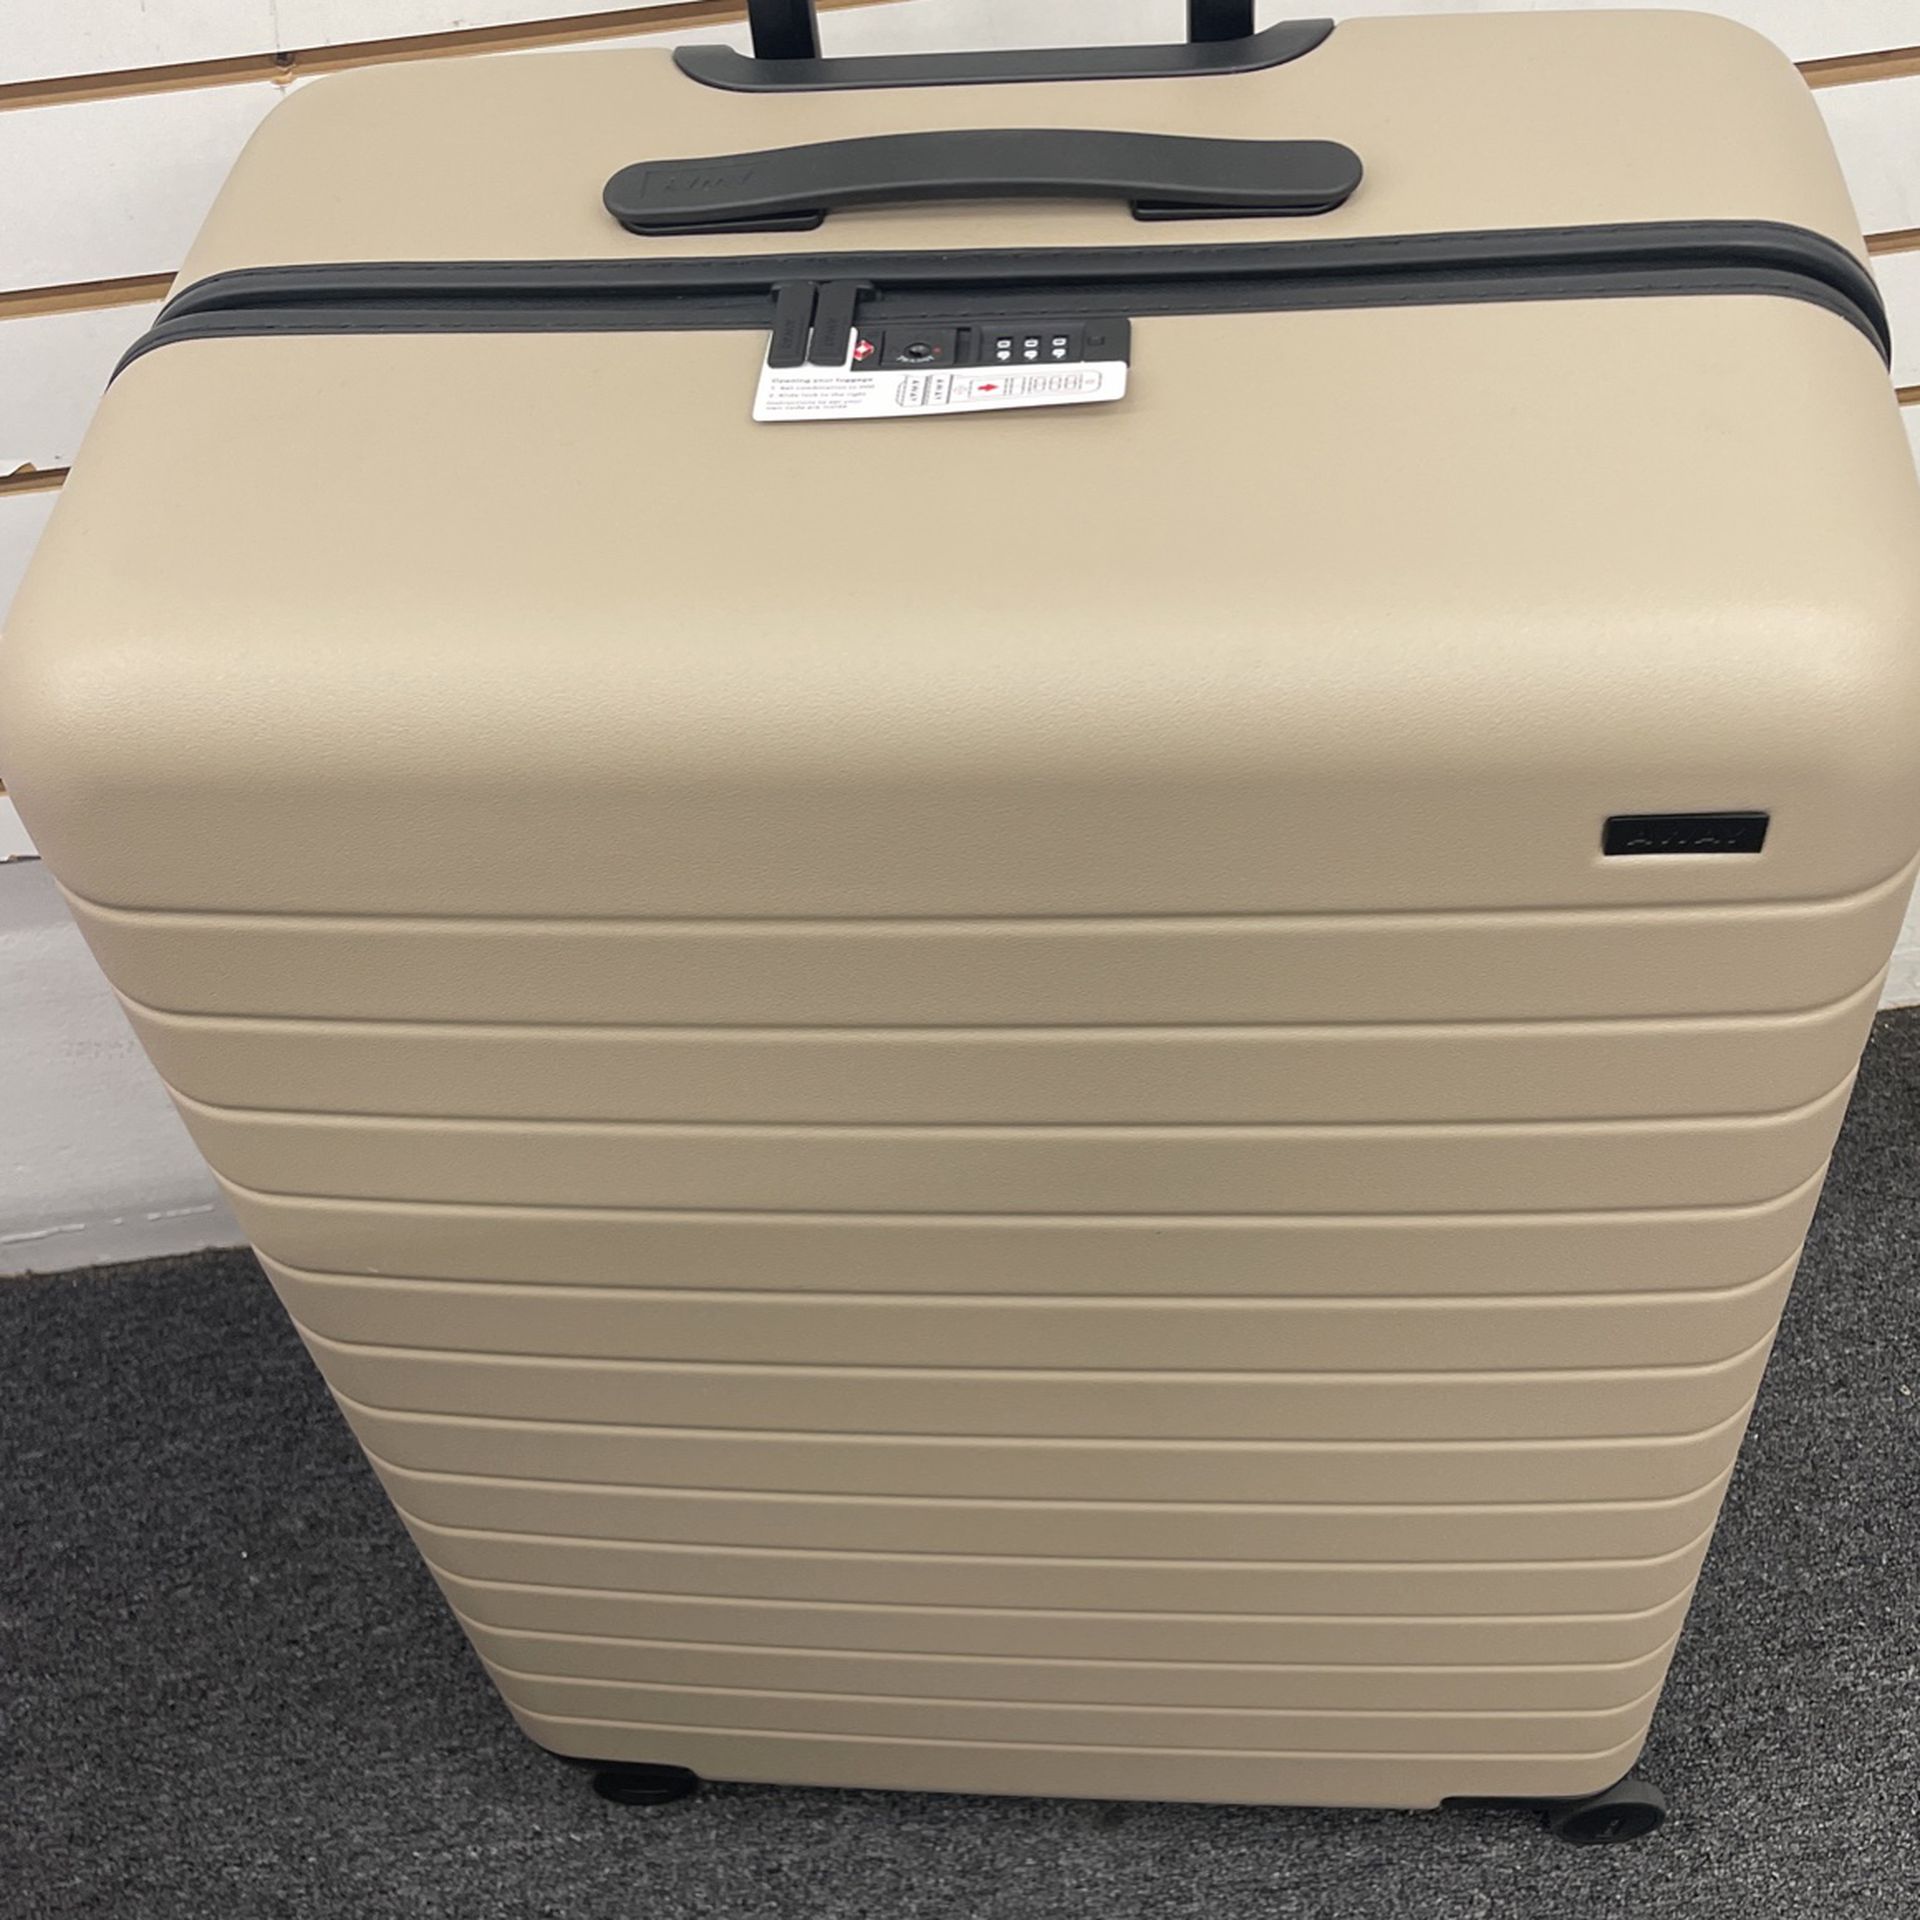 Luggage Away New Sand Beige Large 28 TSA Lock High Quality Hard Case Trave  Bag for Sale in Los Angeles, CA - OfferUp